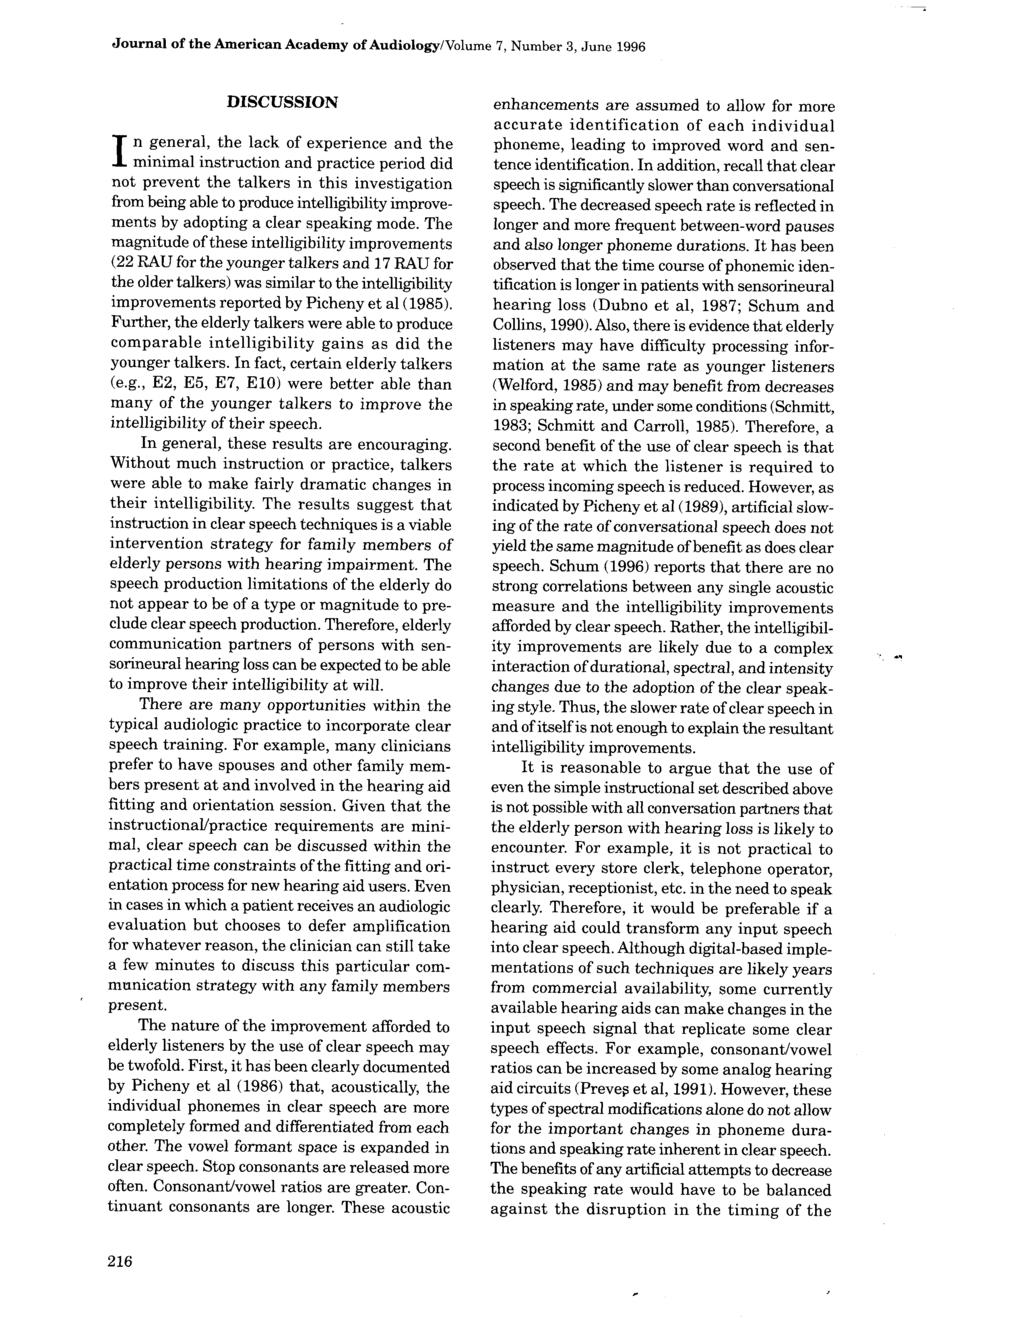 Journal of the American Academy of Audiology/Volume 7, Number 3, June 1996 DISCUSSION n general, the lack of experience and the minimal instruction and practice period did not prevent the talkers in